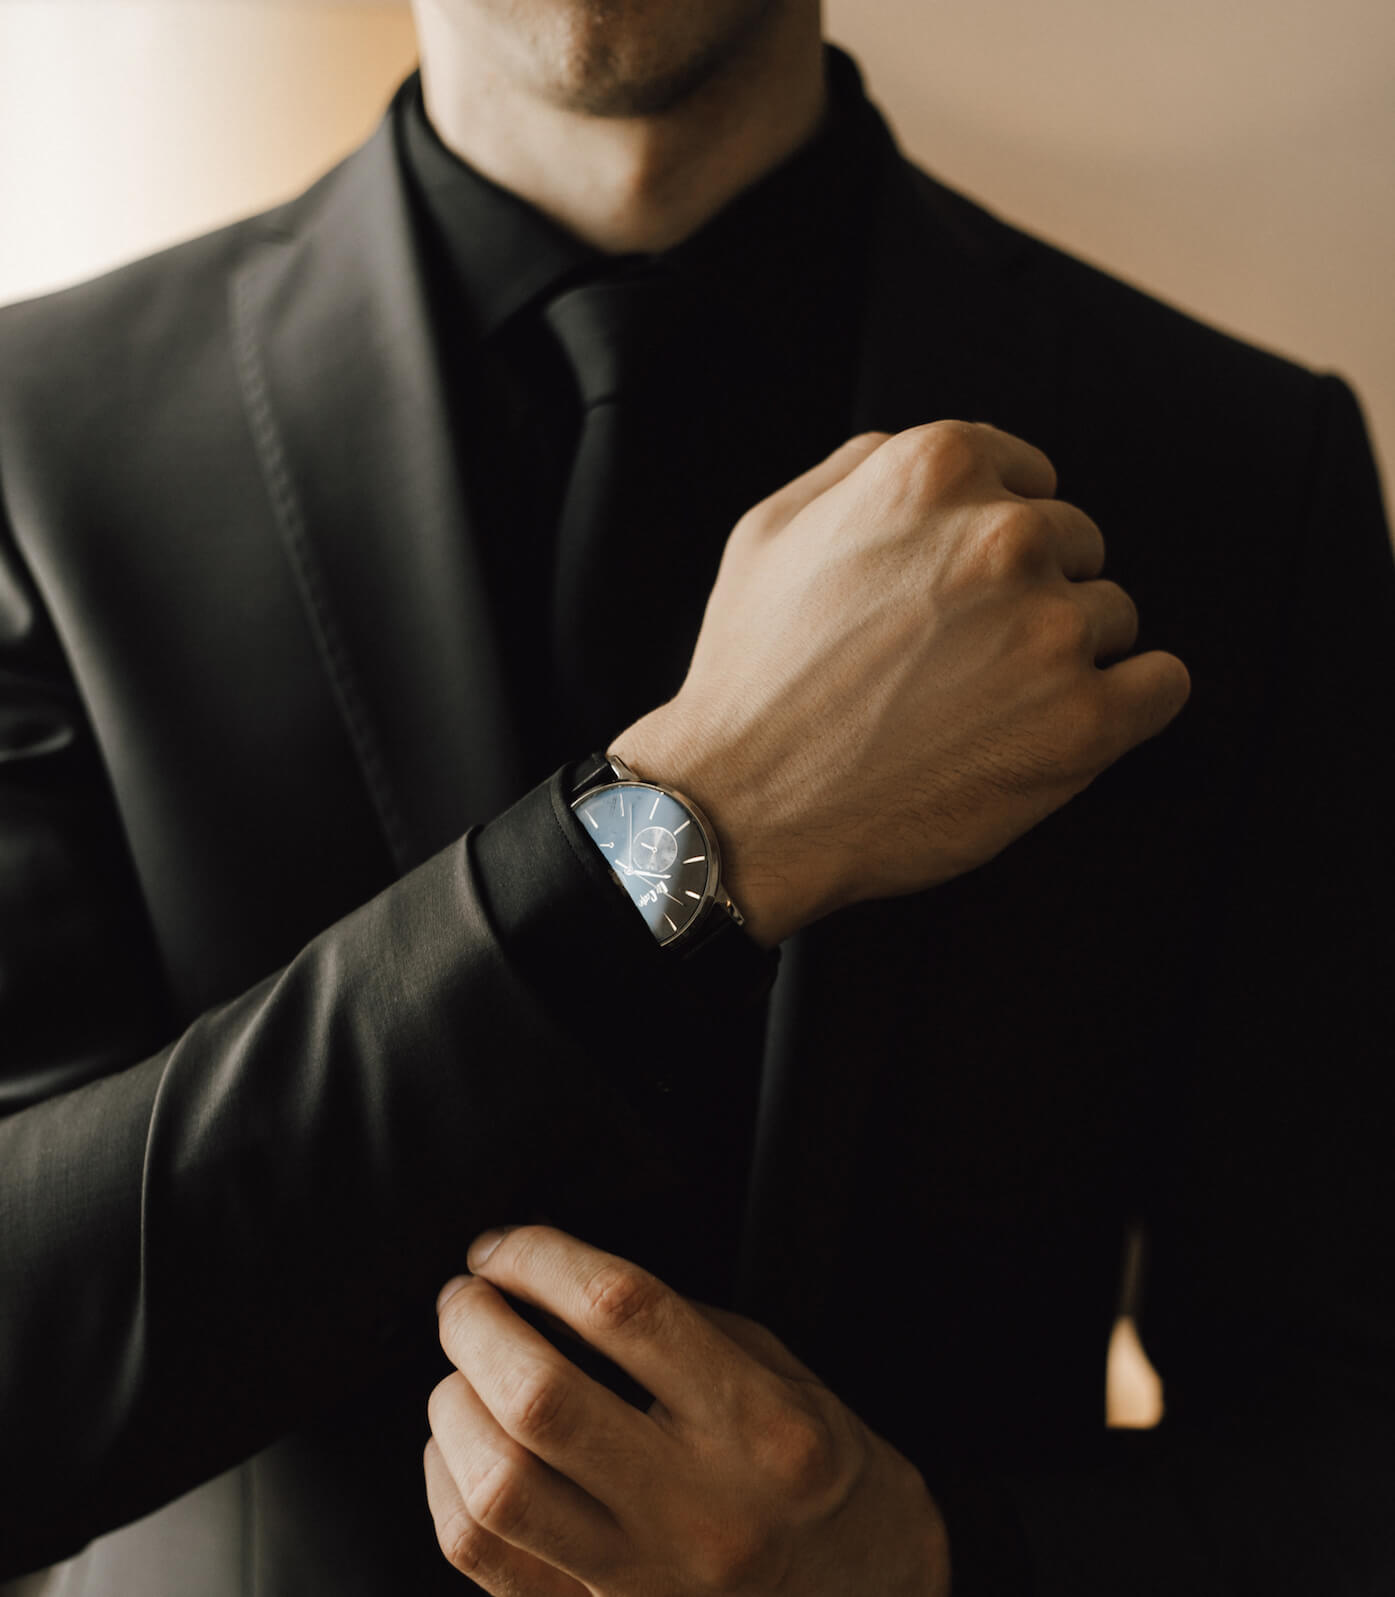 man with a watch on his wrist